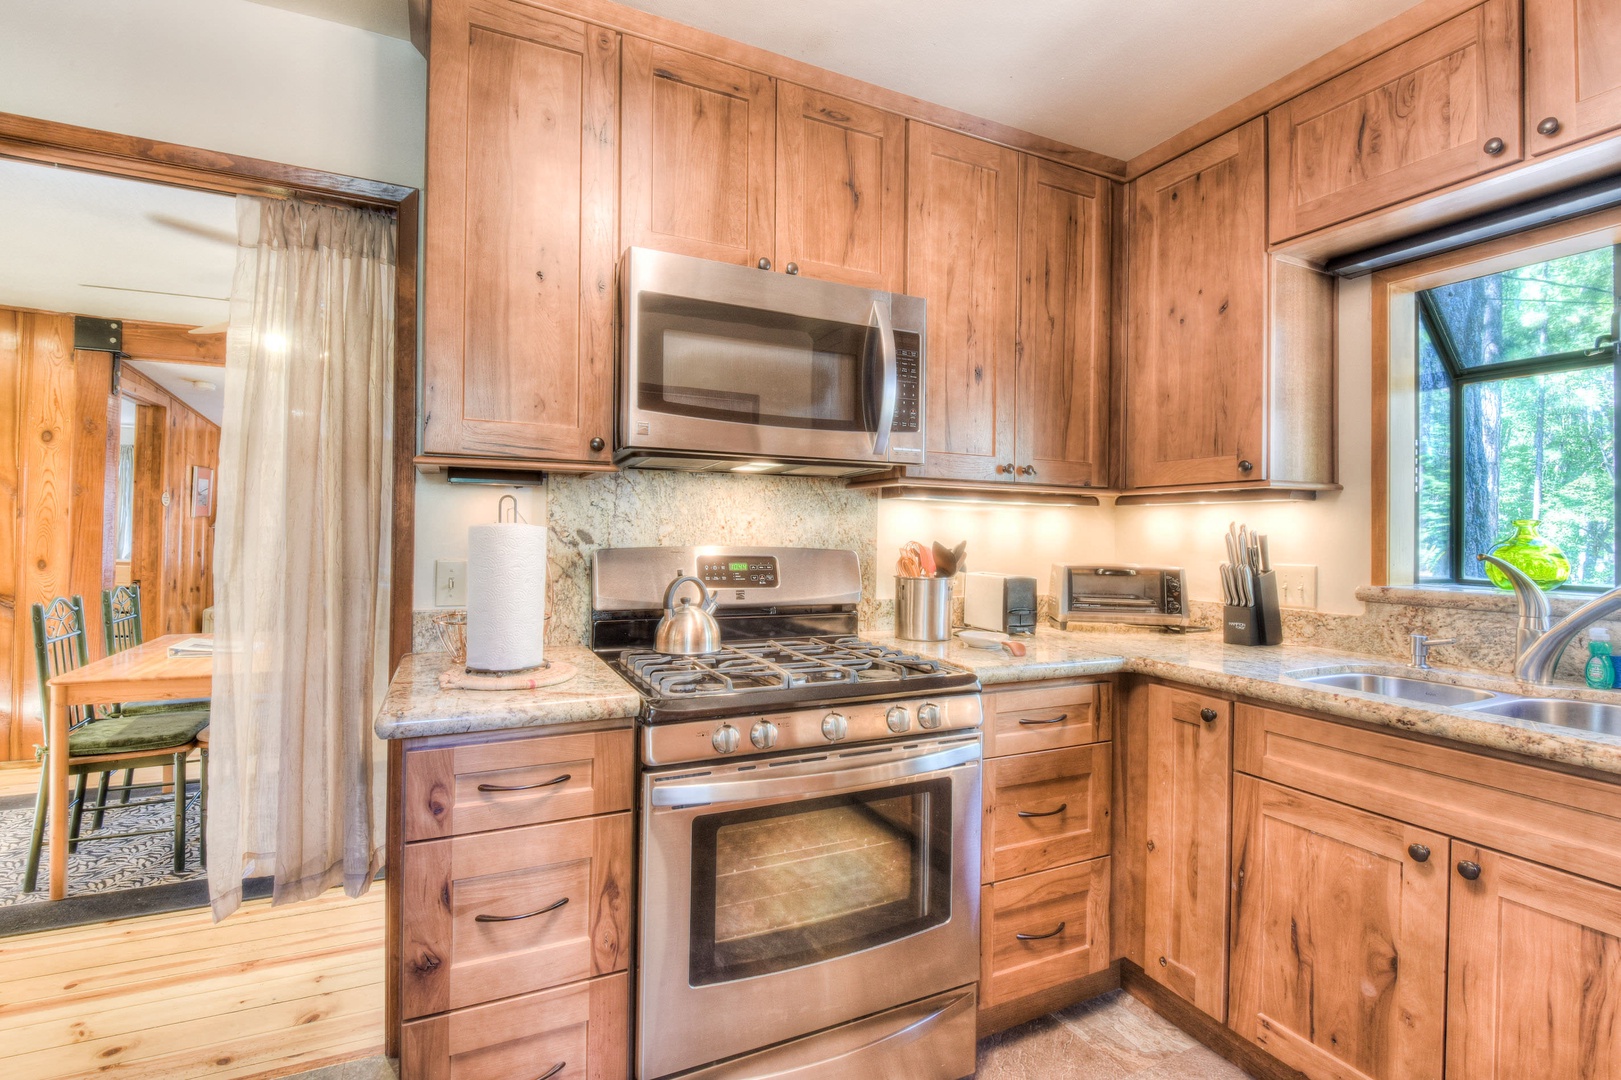 Full kitchen w/ modern appliances: toaster, crockpot, drip coffee maker, wine ware, spices, foil, and much more!